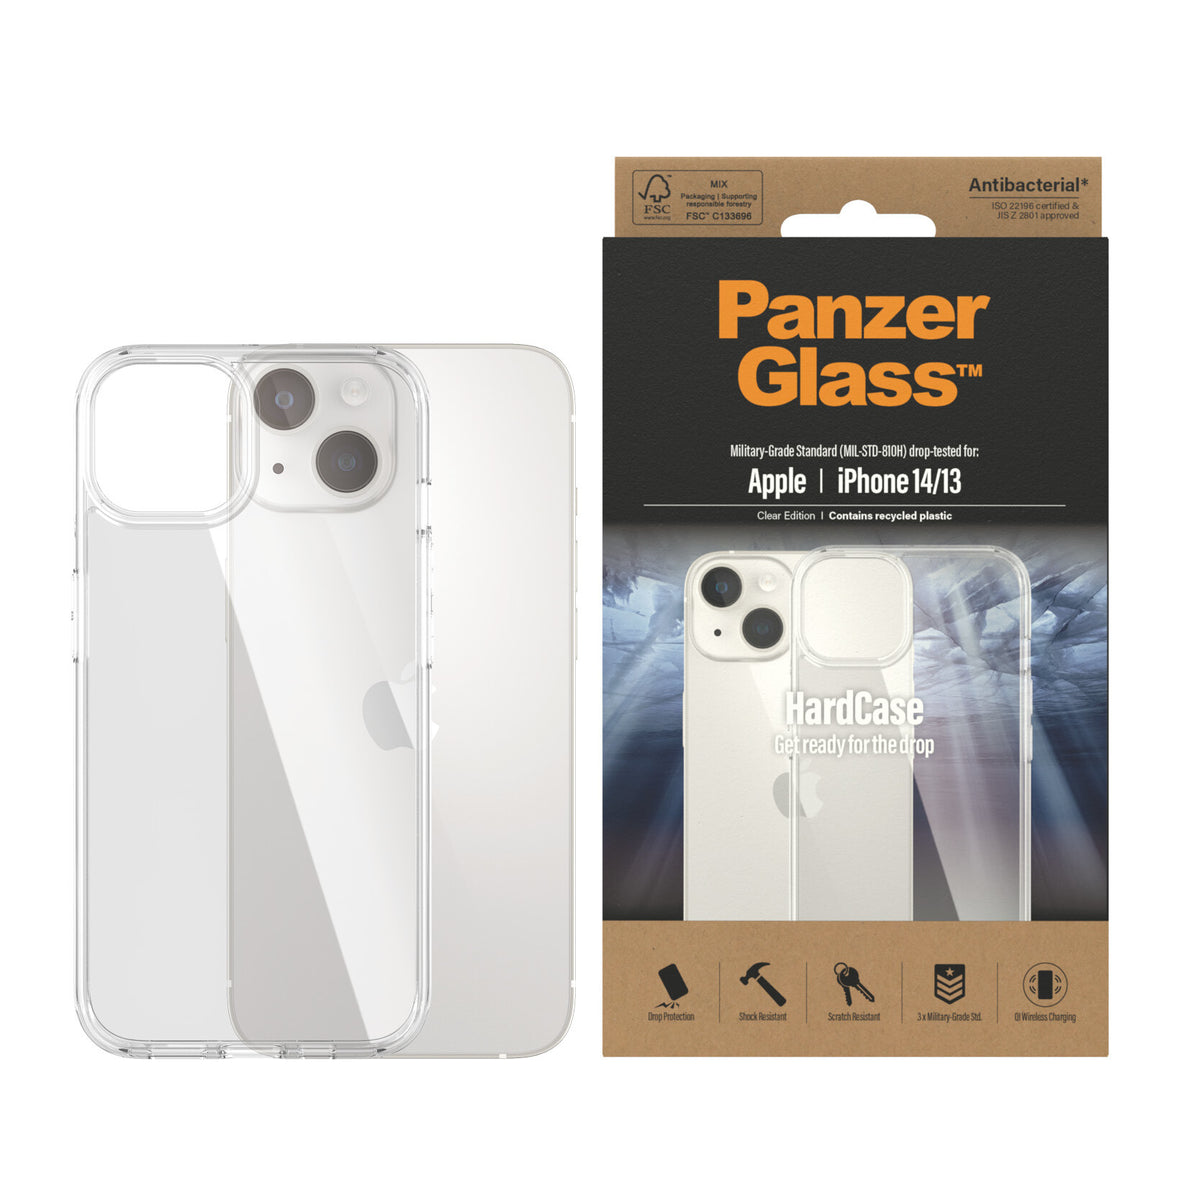 PanzerGlass ® HardCase for iPhone 14 / 13 in Clear